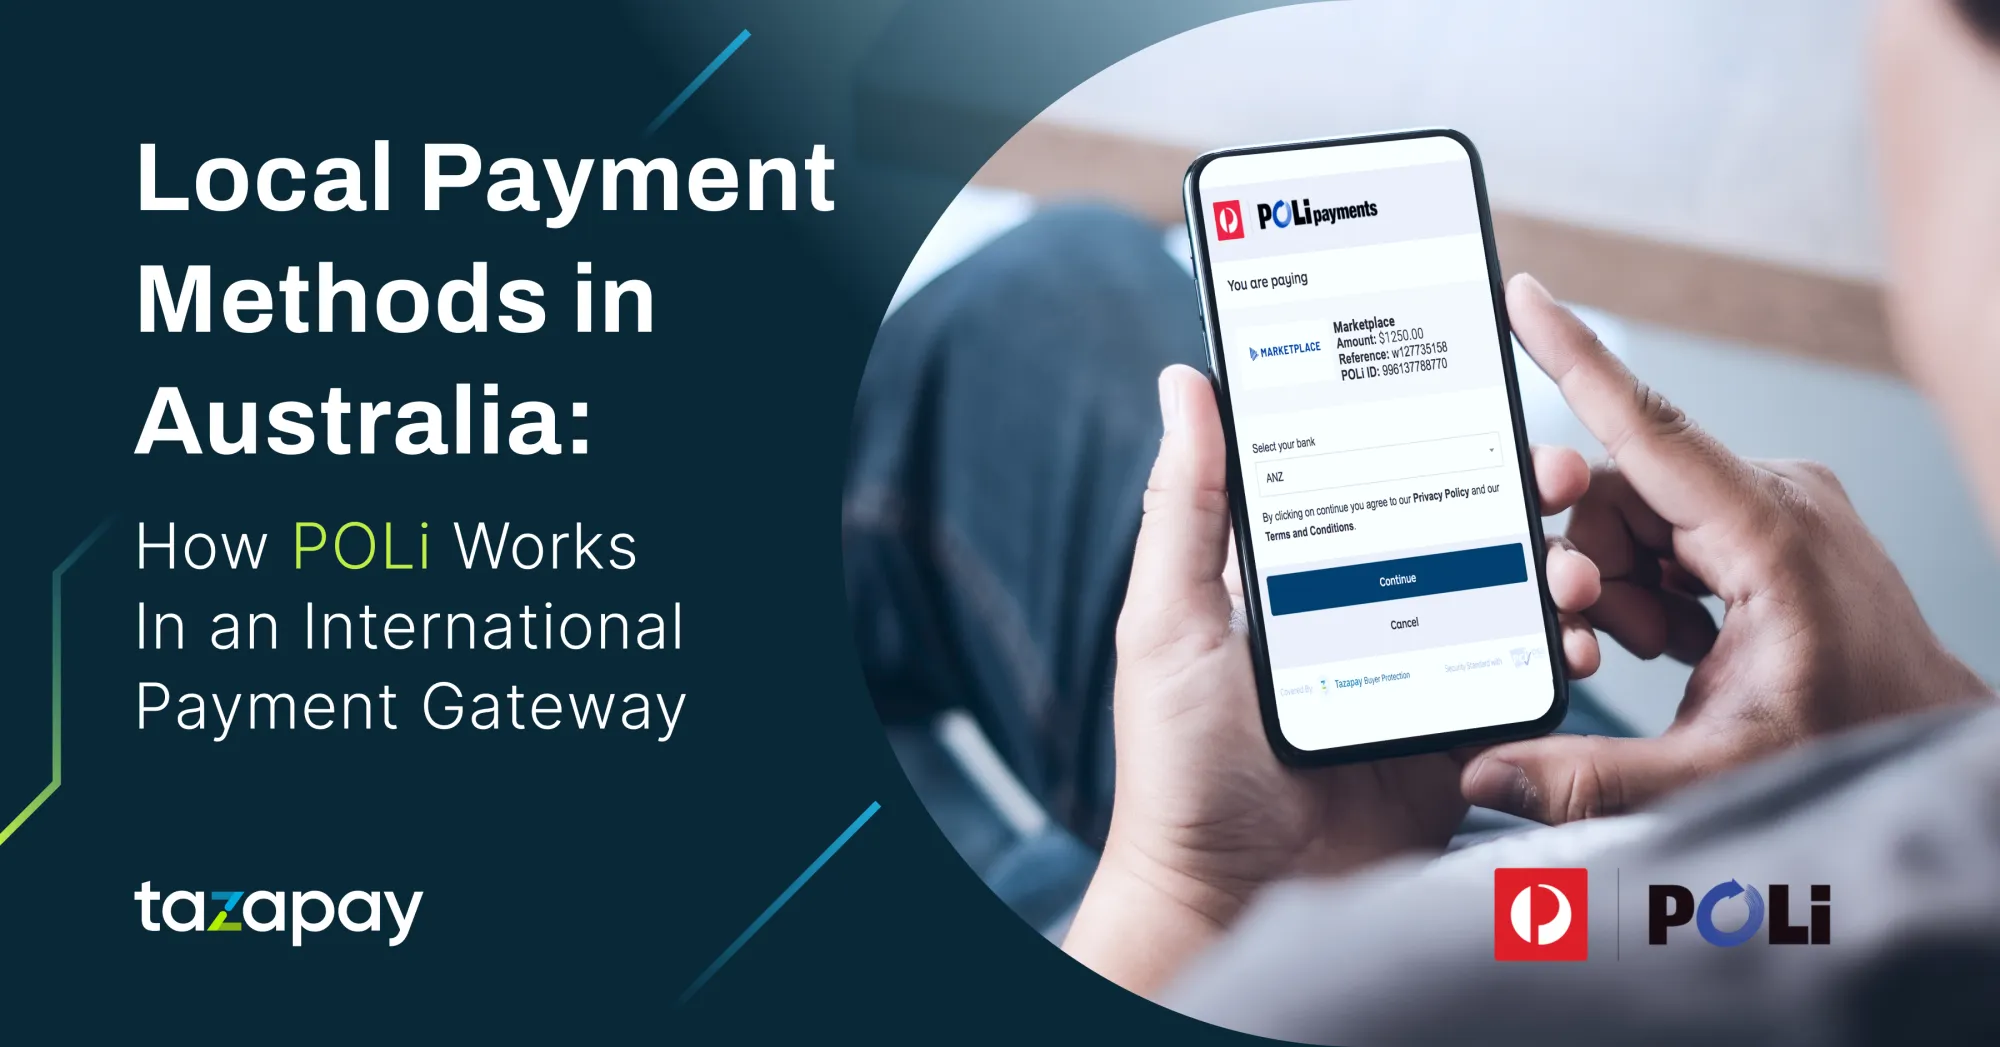 Local Payment Methods in Australia: How POLi Works In an International Payment Gateway